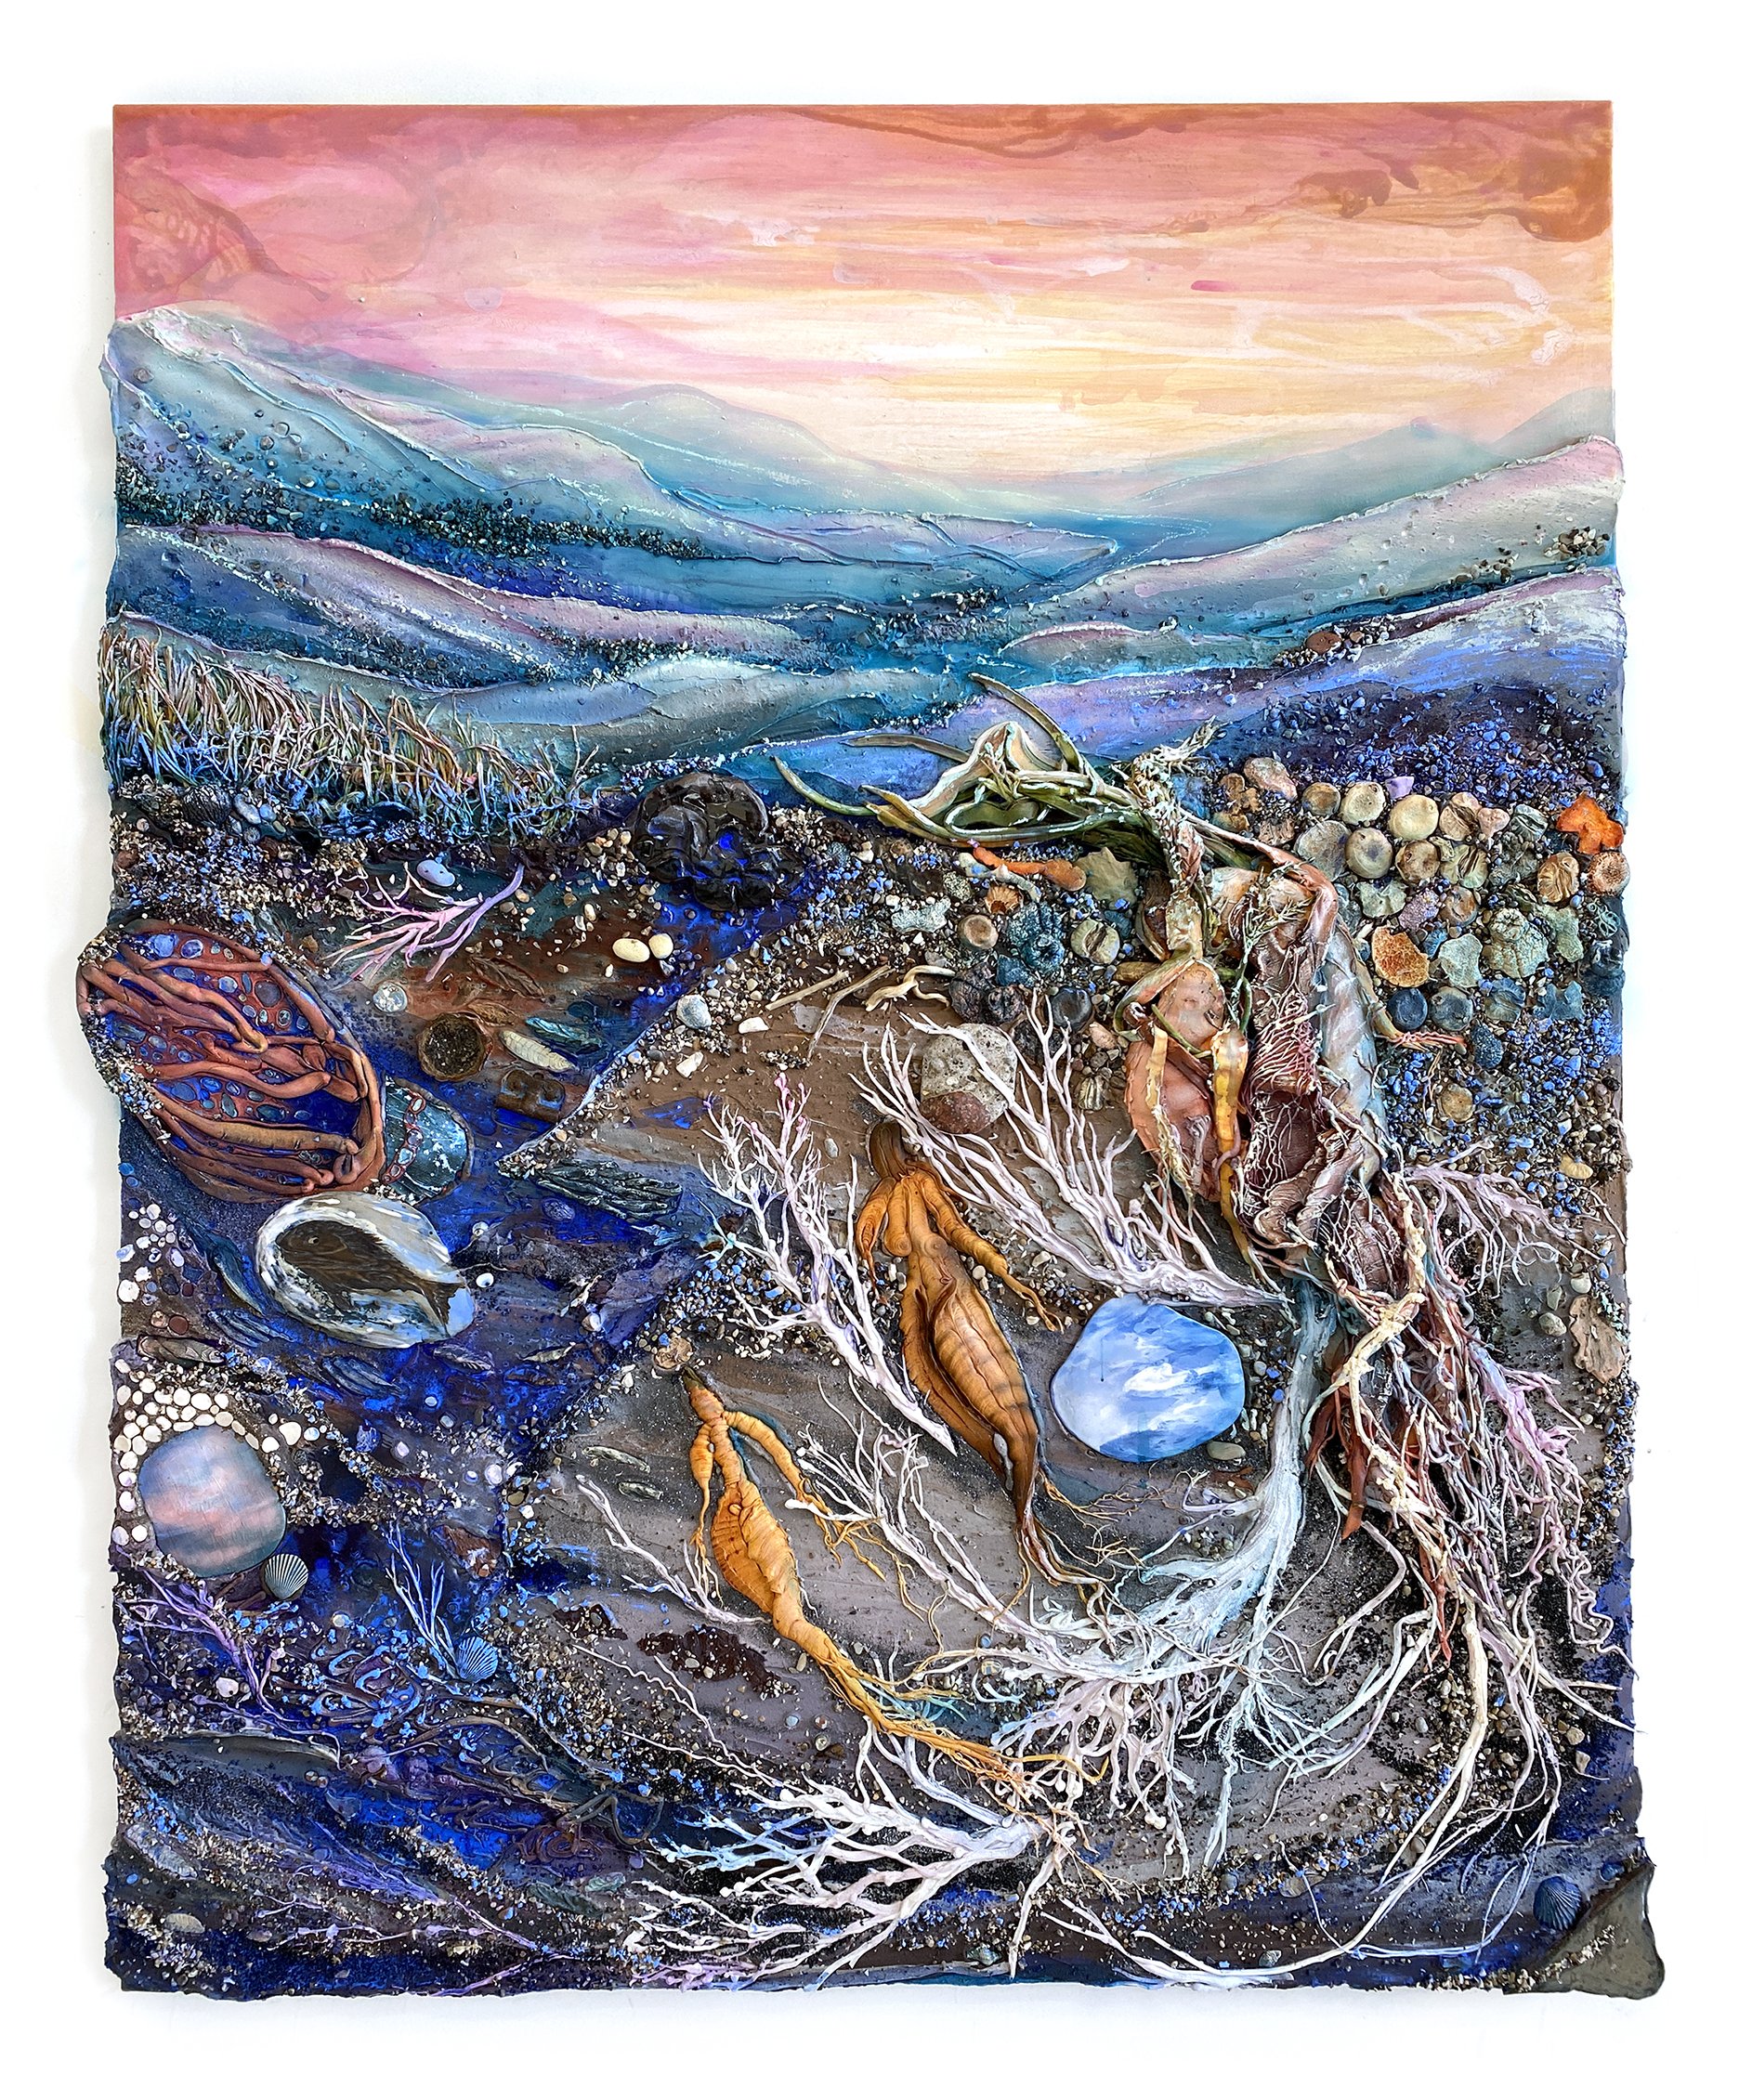  Compost Heap, 2023. Acrylic, pigment, ceramic, vinyl paint, watercolor, pumice, sand, garnet, rocks from Lake Michigan, found objects, and oil stick on canvas, 50.25 x 60.25 x 3 in.  